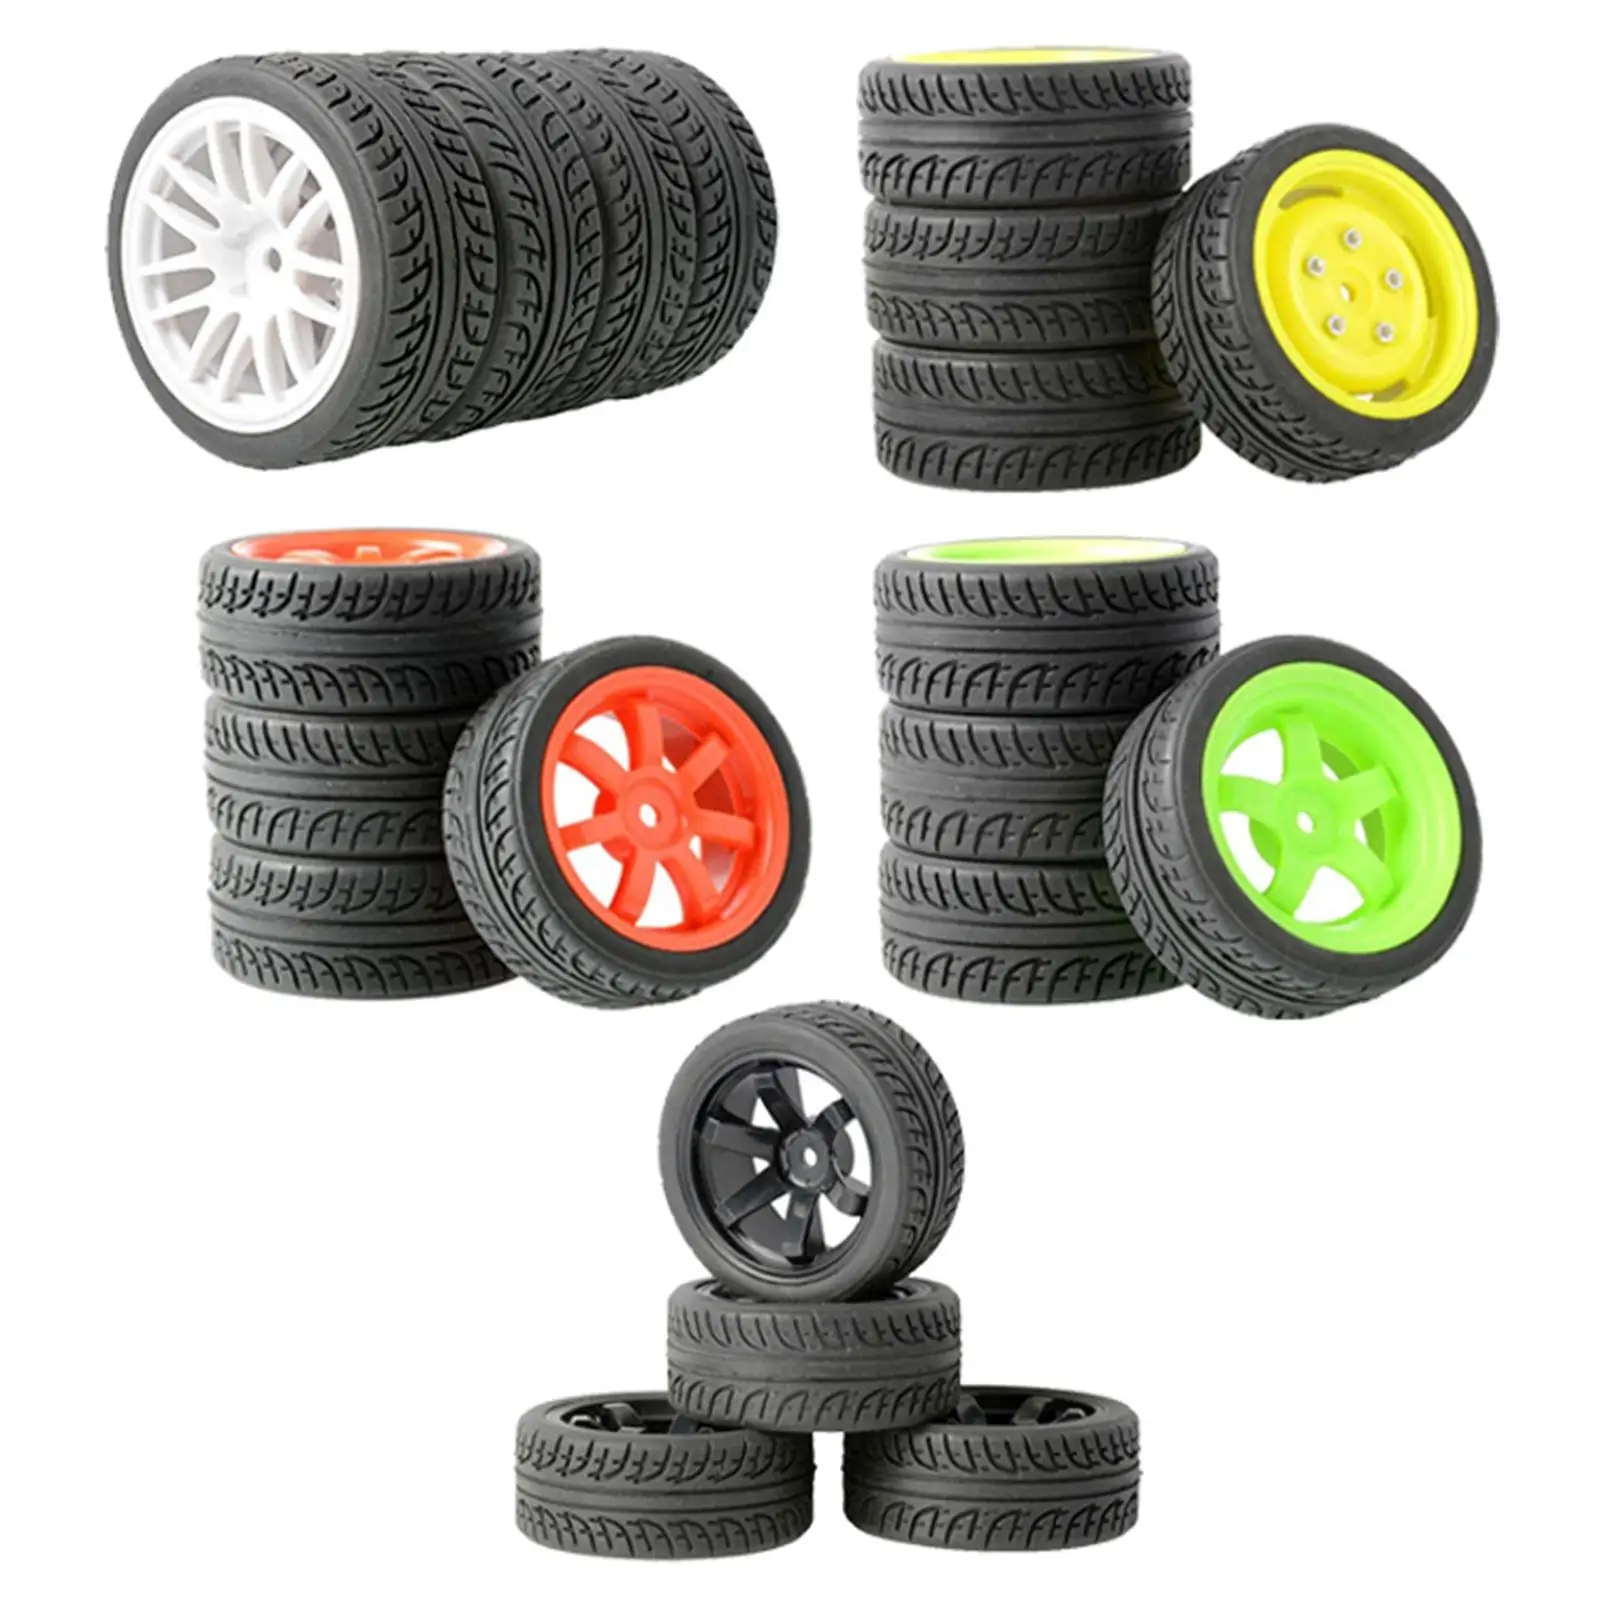 4 Pieces RC Car Tires 1/16 1/12 1/14 Accessories Model Upgrade Universal Tires  Wheels for Wltoys 144001 Off Road Vehicle Crawler - AliExpress